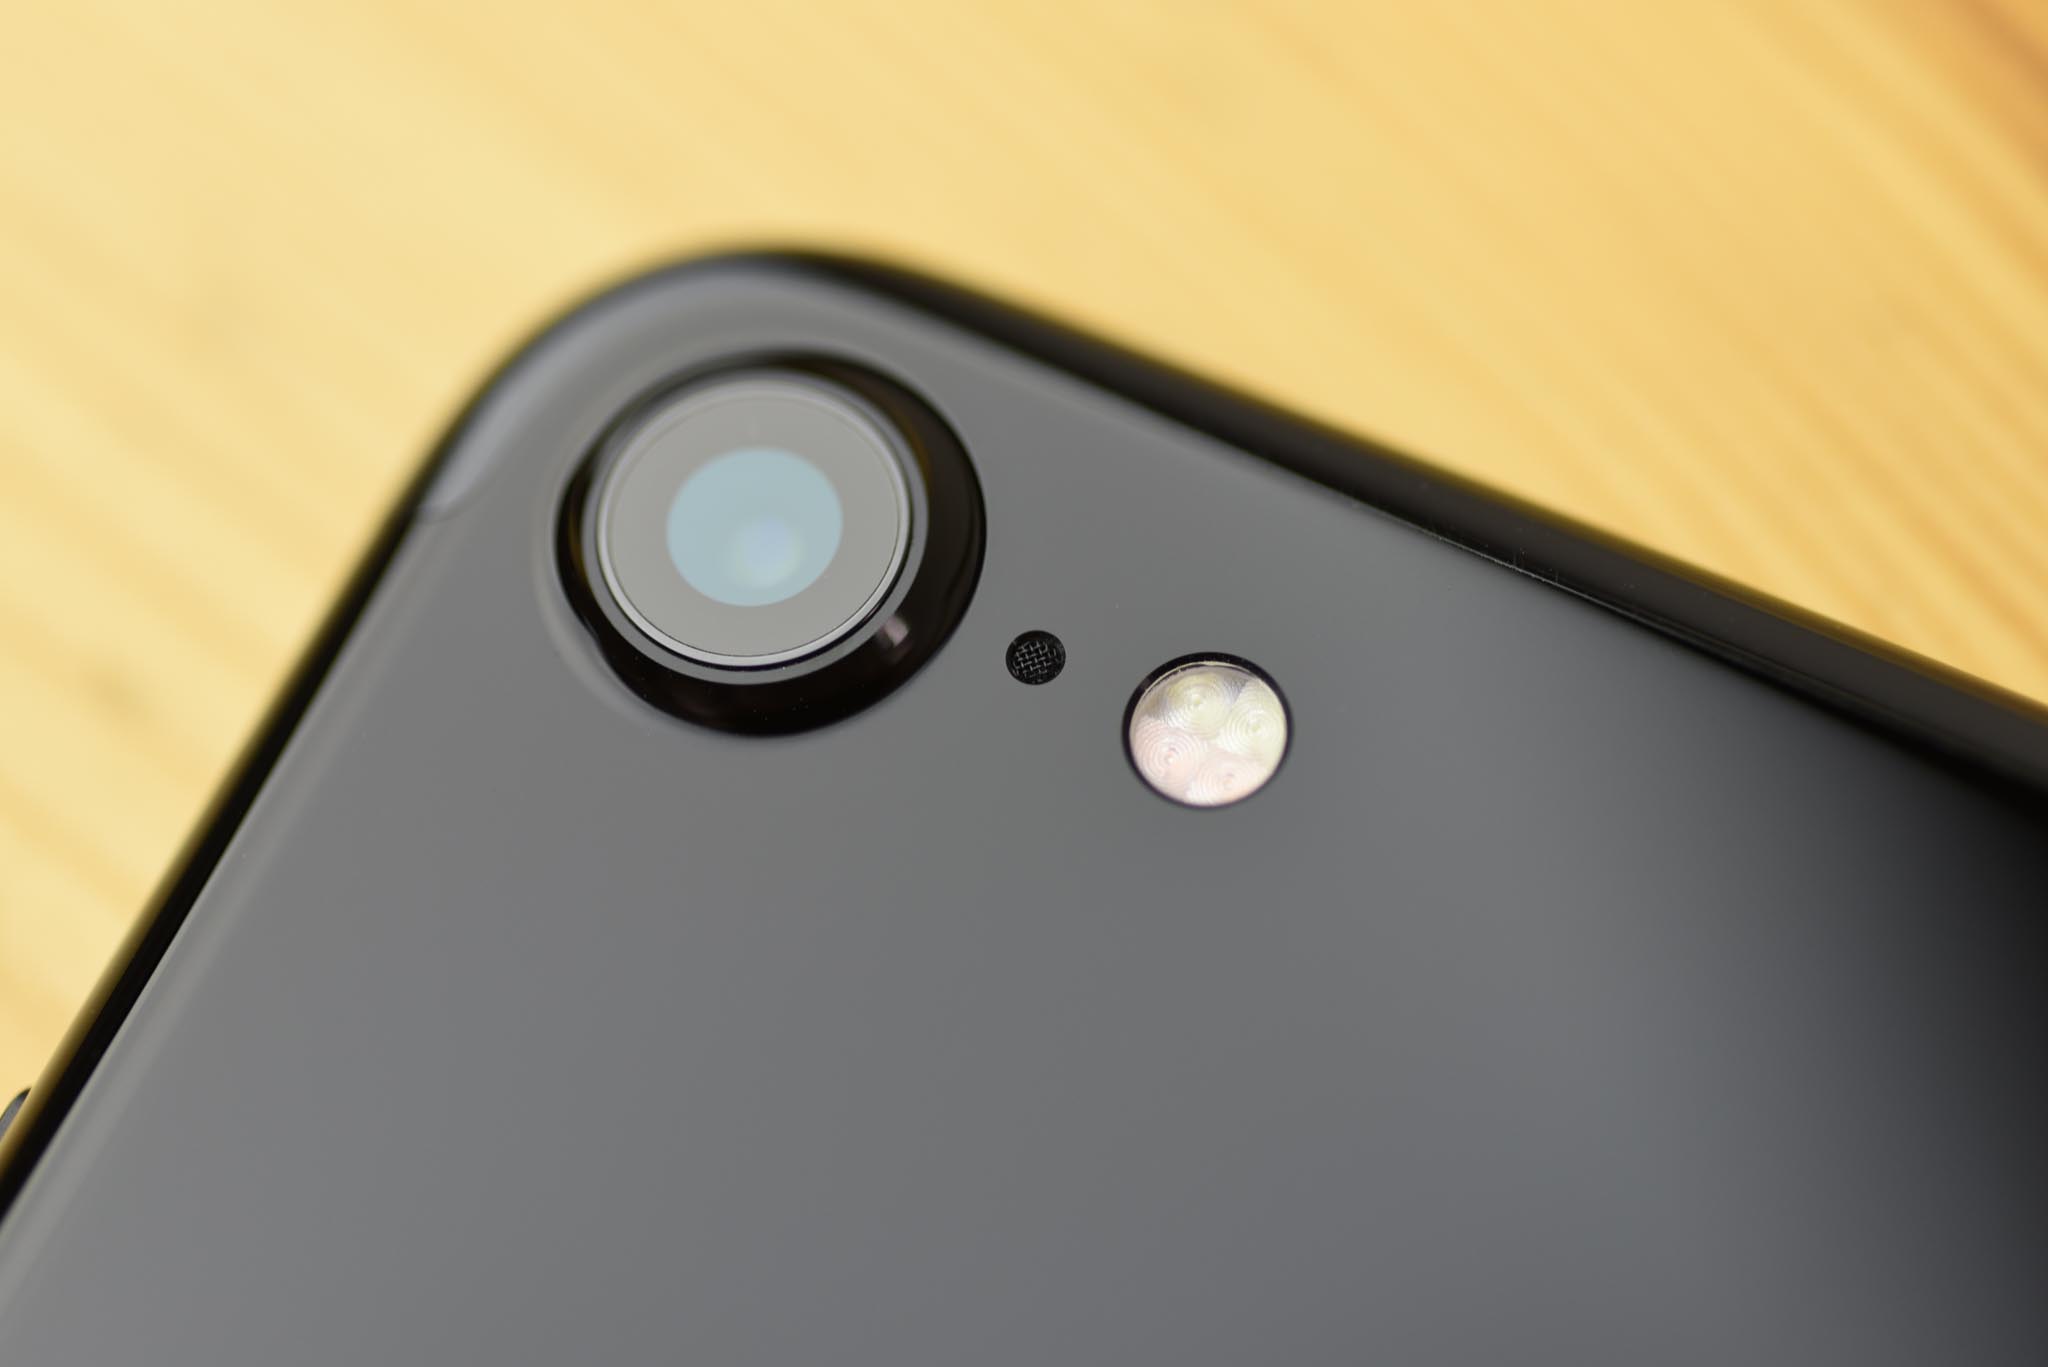 Yes, the iPhone 7 lenses really are made out of sapphire